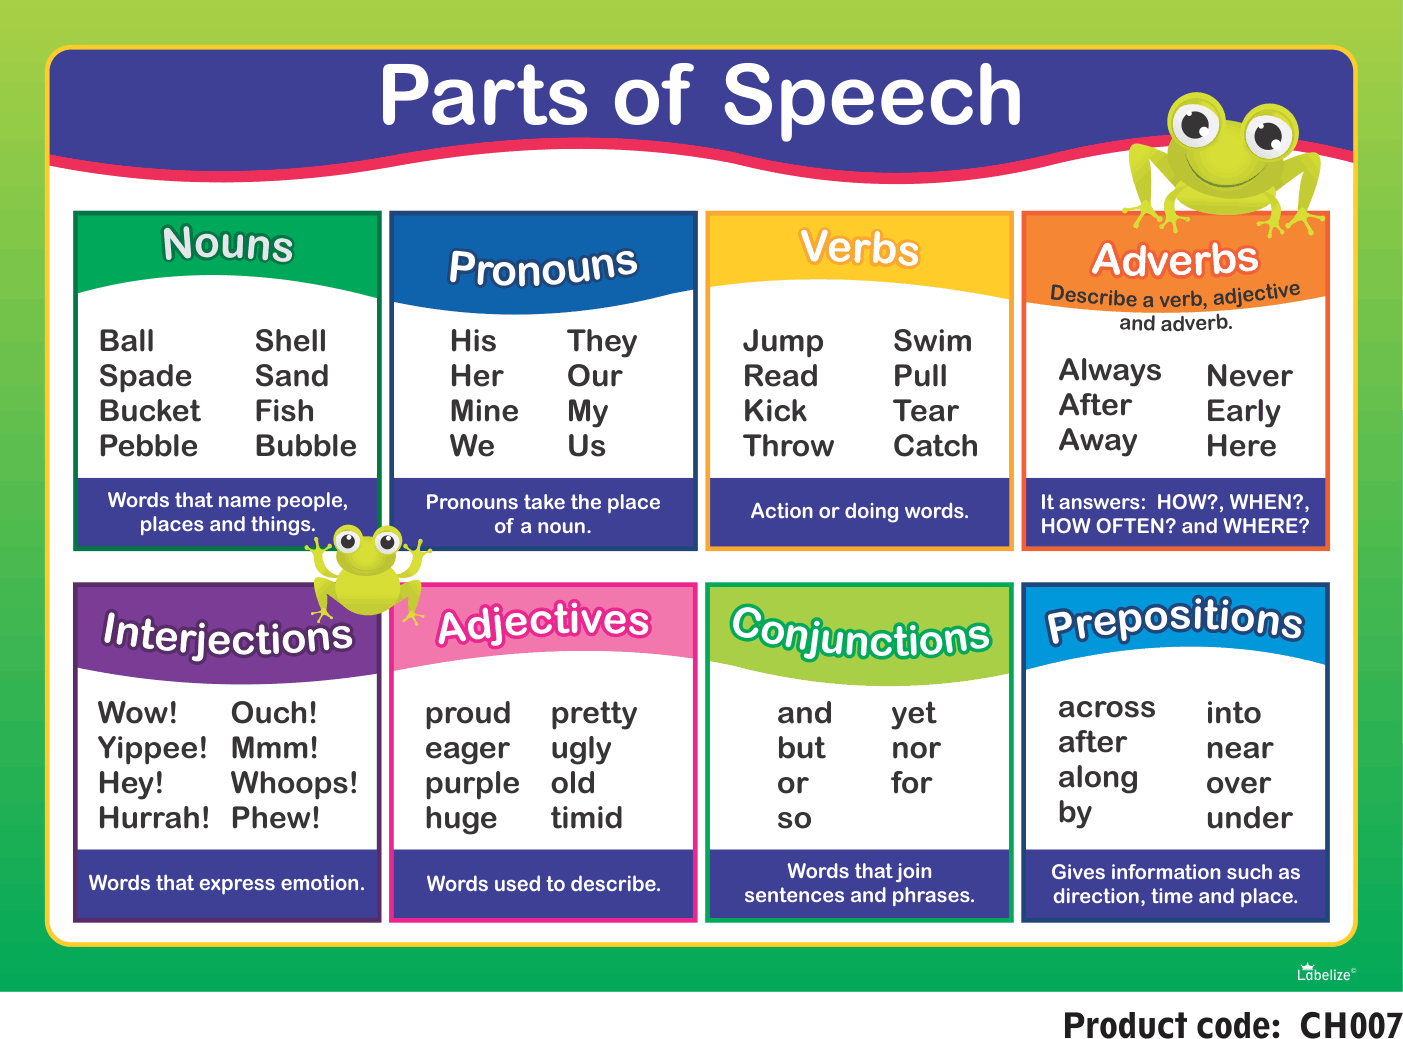 parts-of-speech-in-english-chart